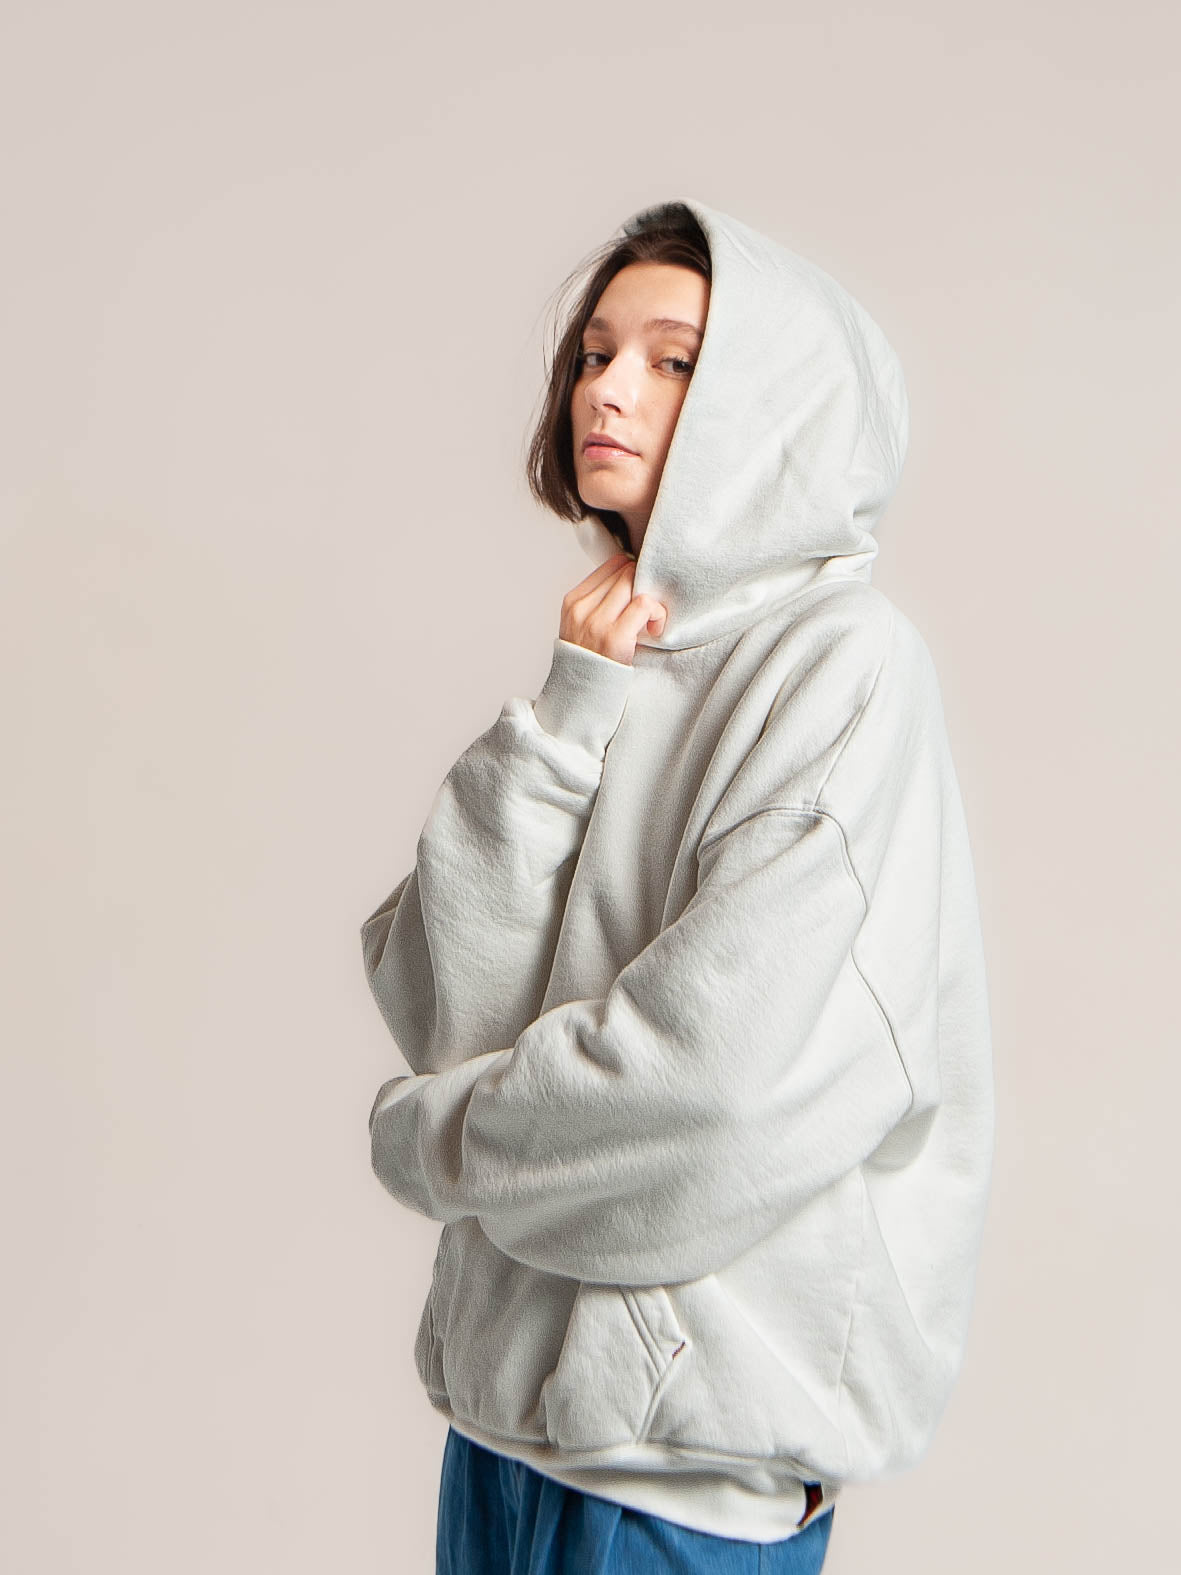 Female model wears Publik Brand Double Layered Hoodie Acoustic White Heavyweight Fleece, all made in USA